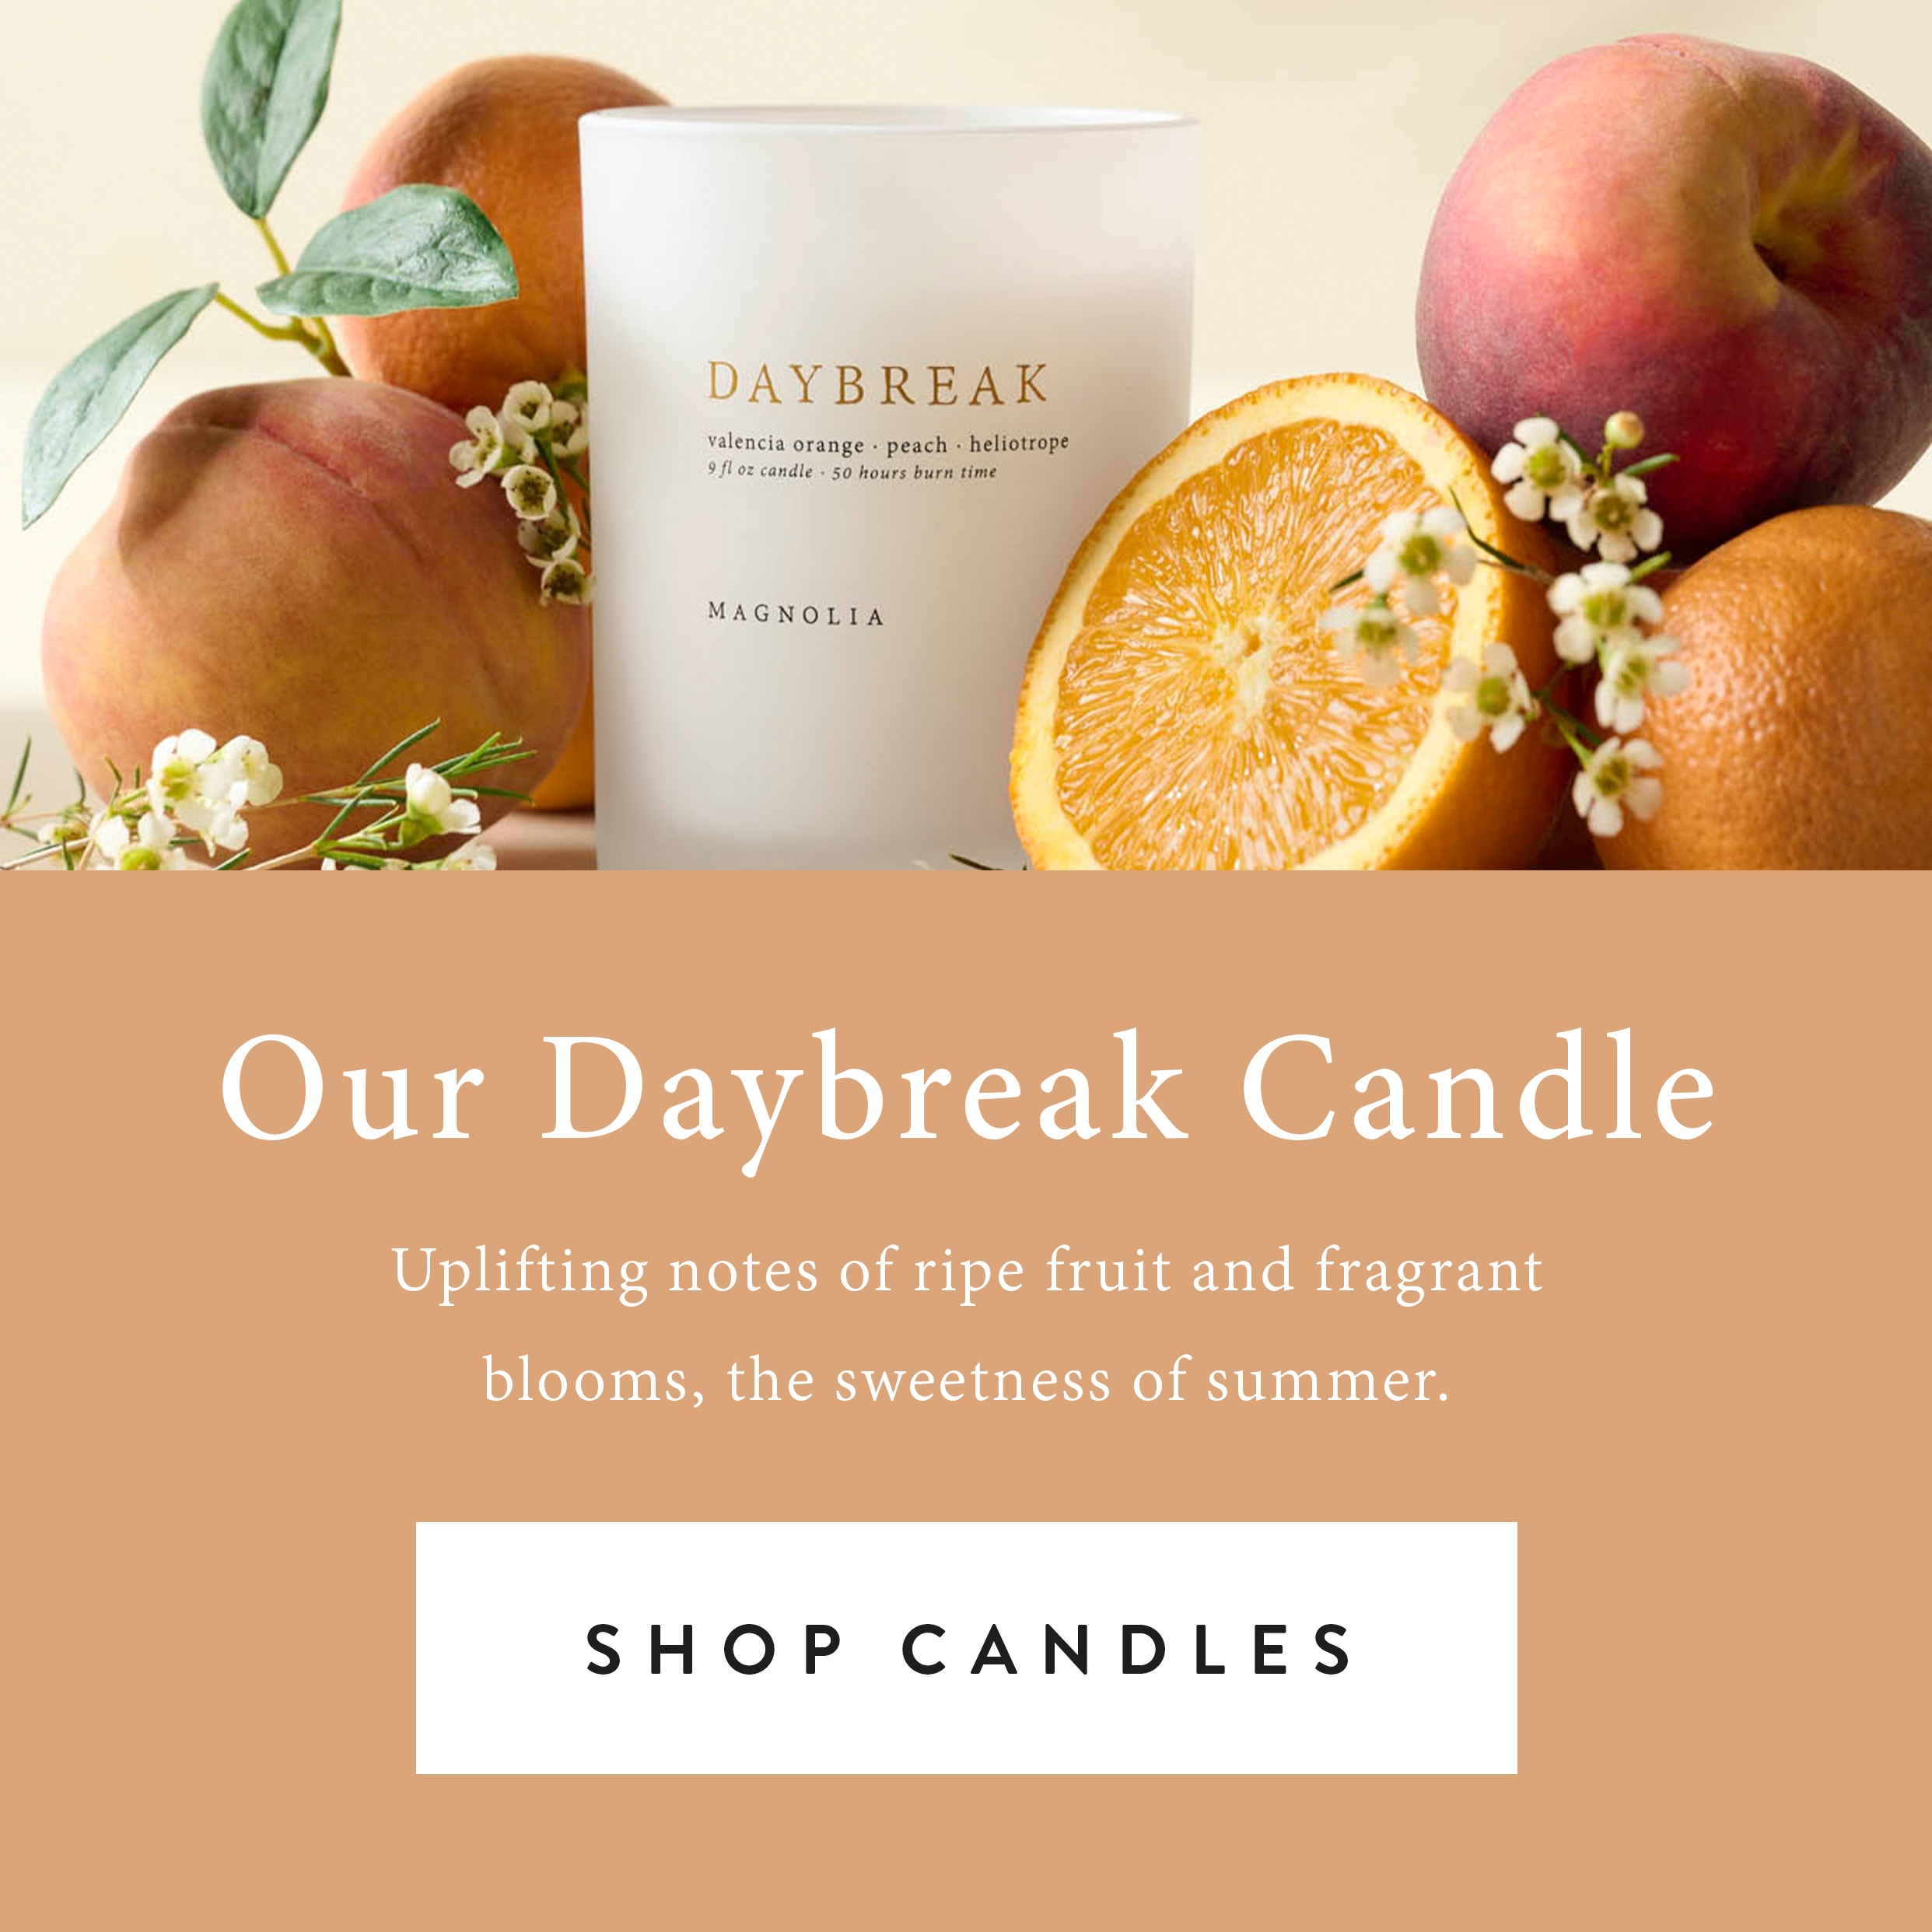 Our Daybreak Candle.  Uplifting Notes of ripe fruit and fragrant blooms, the sweetness of summer.  shop candles here.